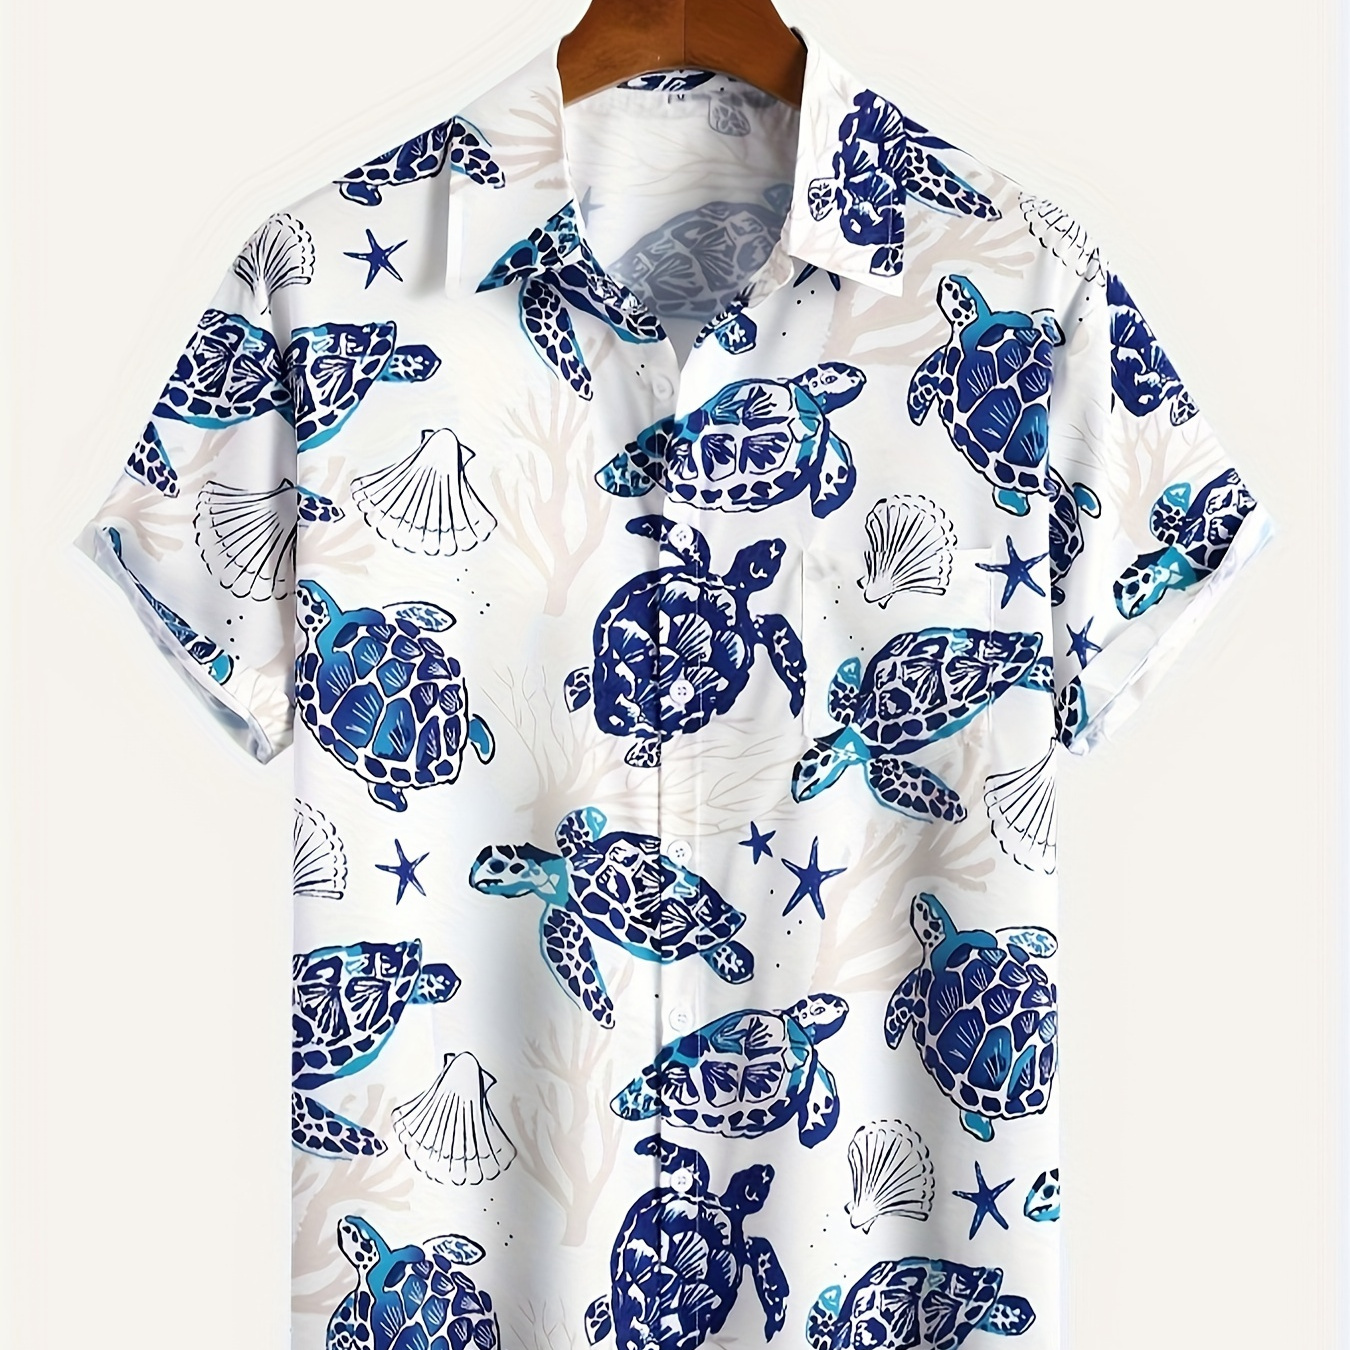 

Plus Size Men's Hawaiian Shirts For Beach, Comfy Sea Turtle Full Printed Short Sleeve Aloha Shirts, Oversized Casual Loose Tops For Summer